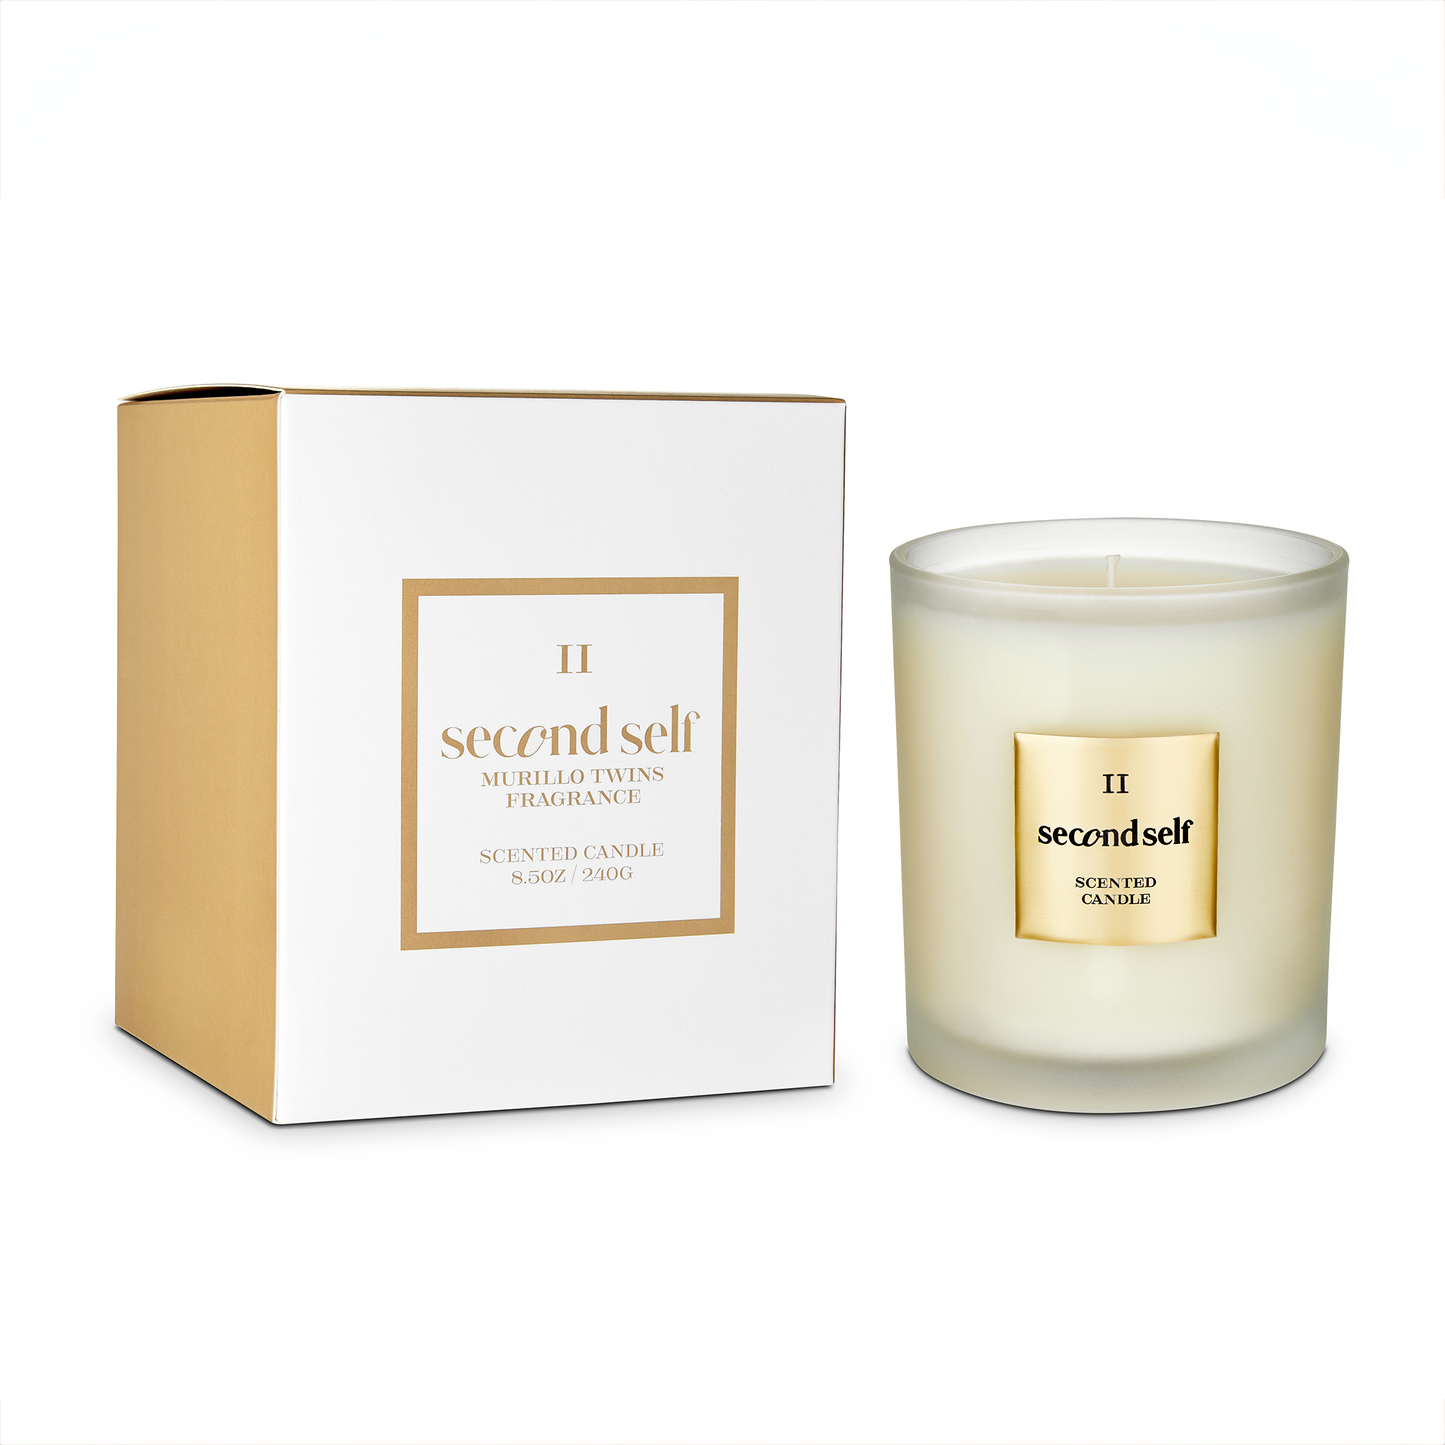 Second Self Scented Candle